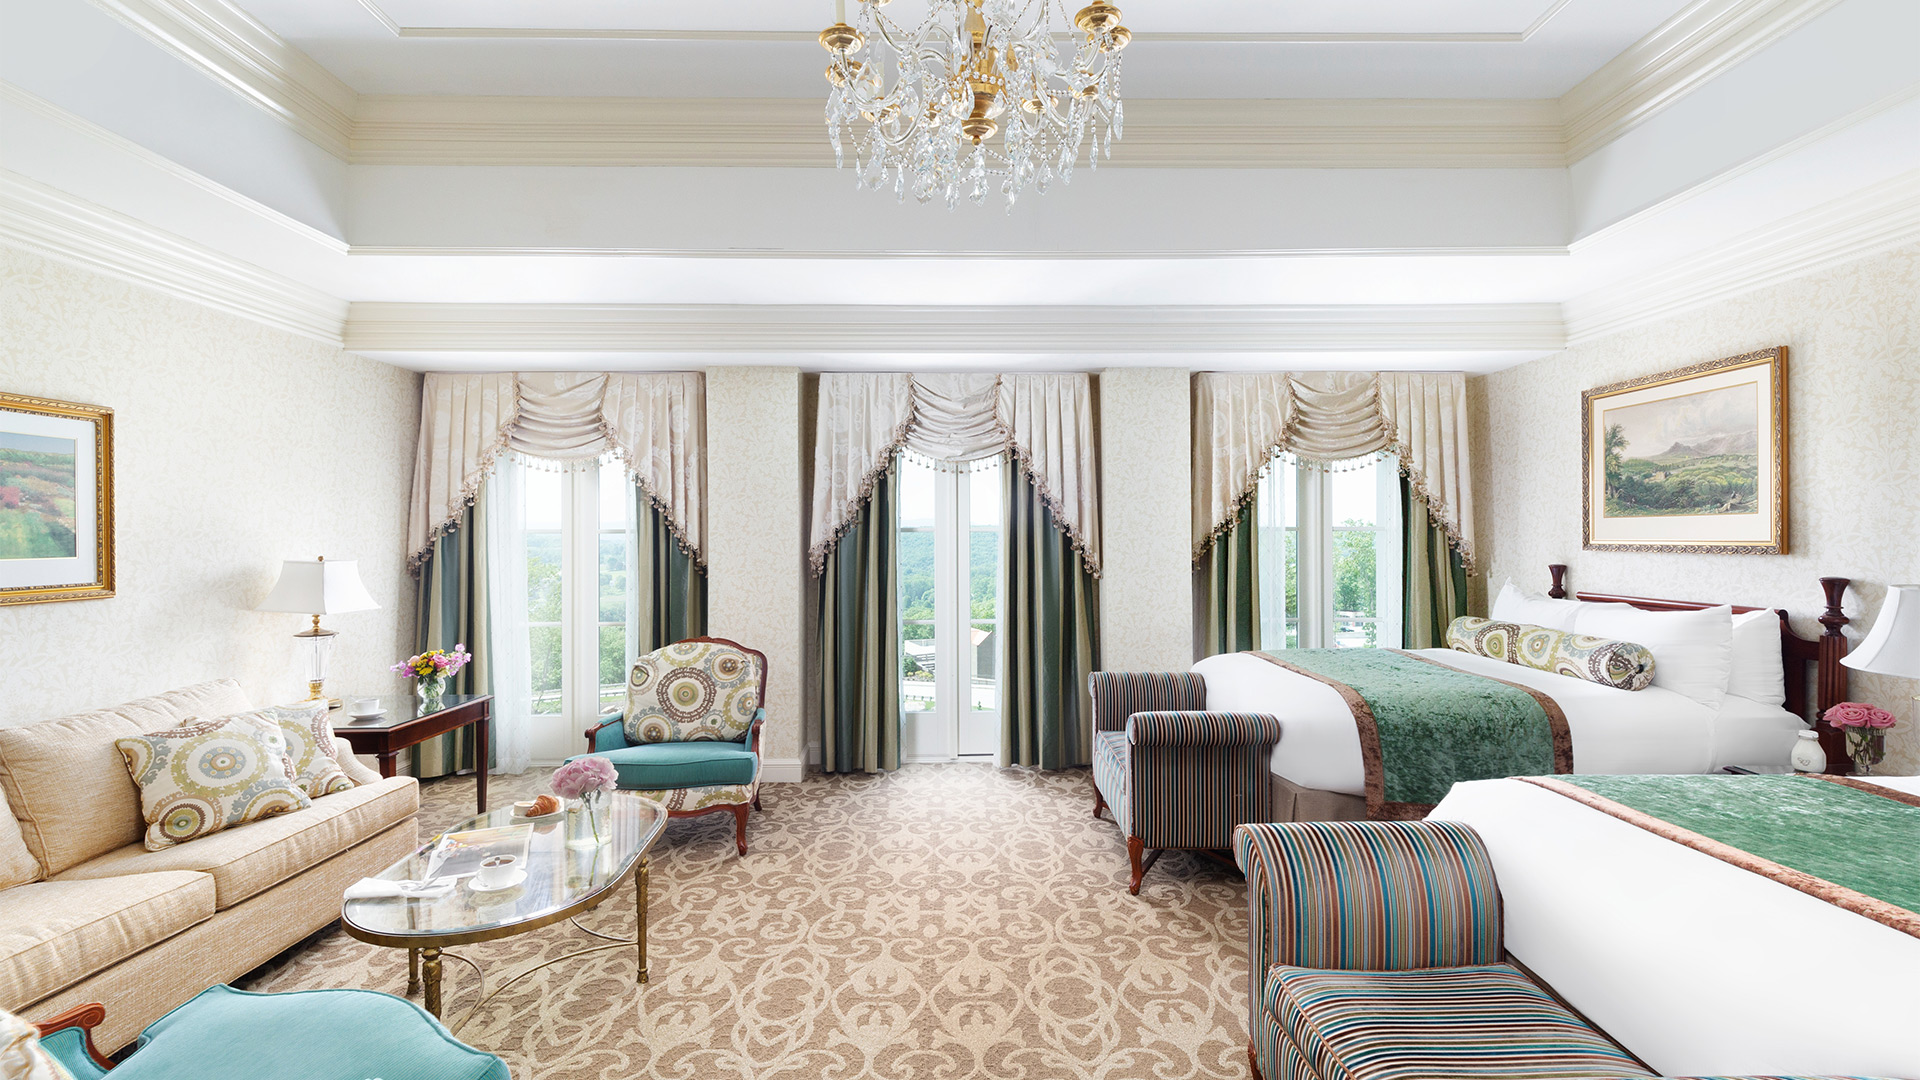 interior shot of The Chateau's junior double room. There are two queen beds with green and white linens and sitting benches at the foot of each. There are three windows overlooking the resort grounds and a sitting area